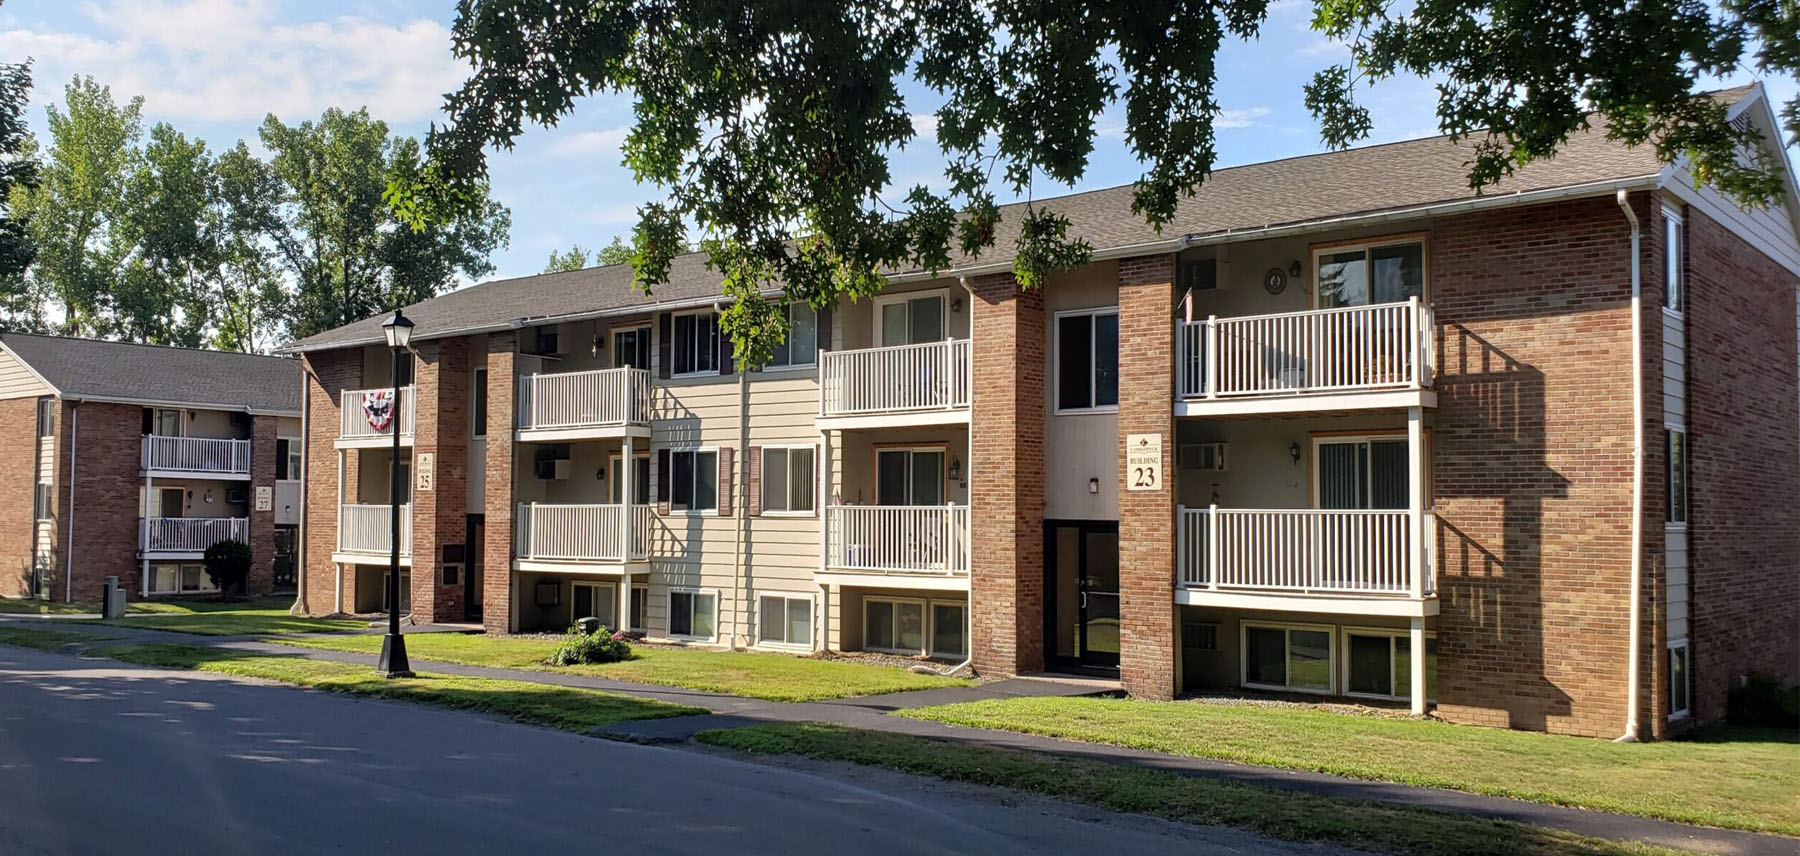 Apartments In Utica NY - Apartments For Rent Candlewyck Apartments | Barrington Residential